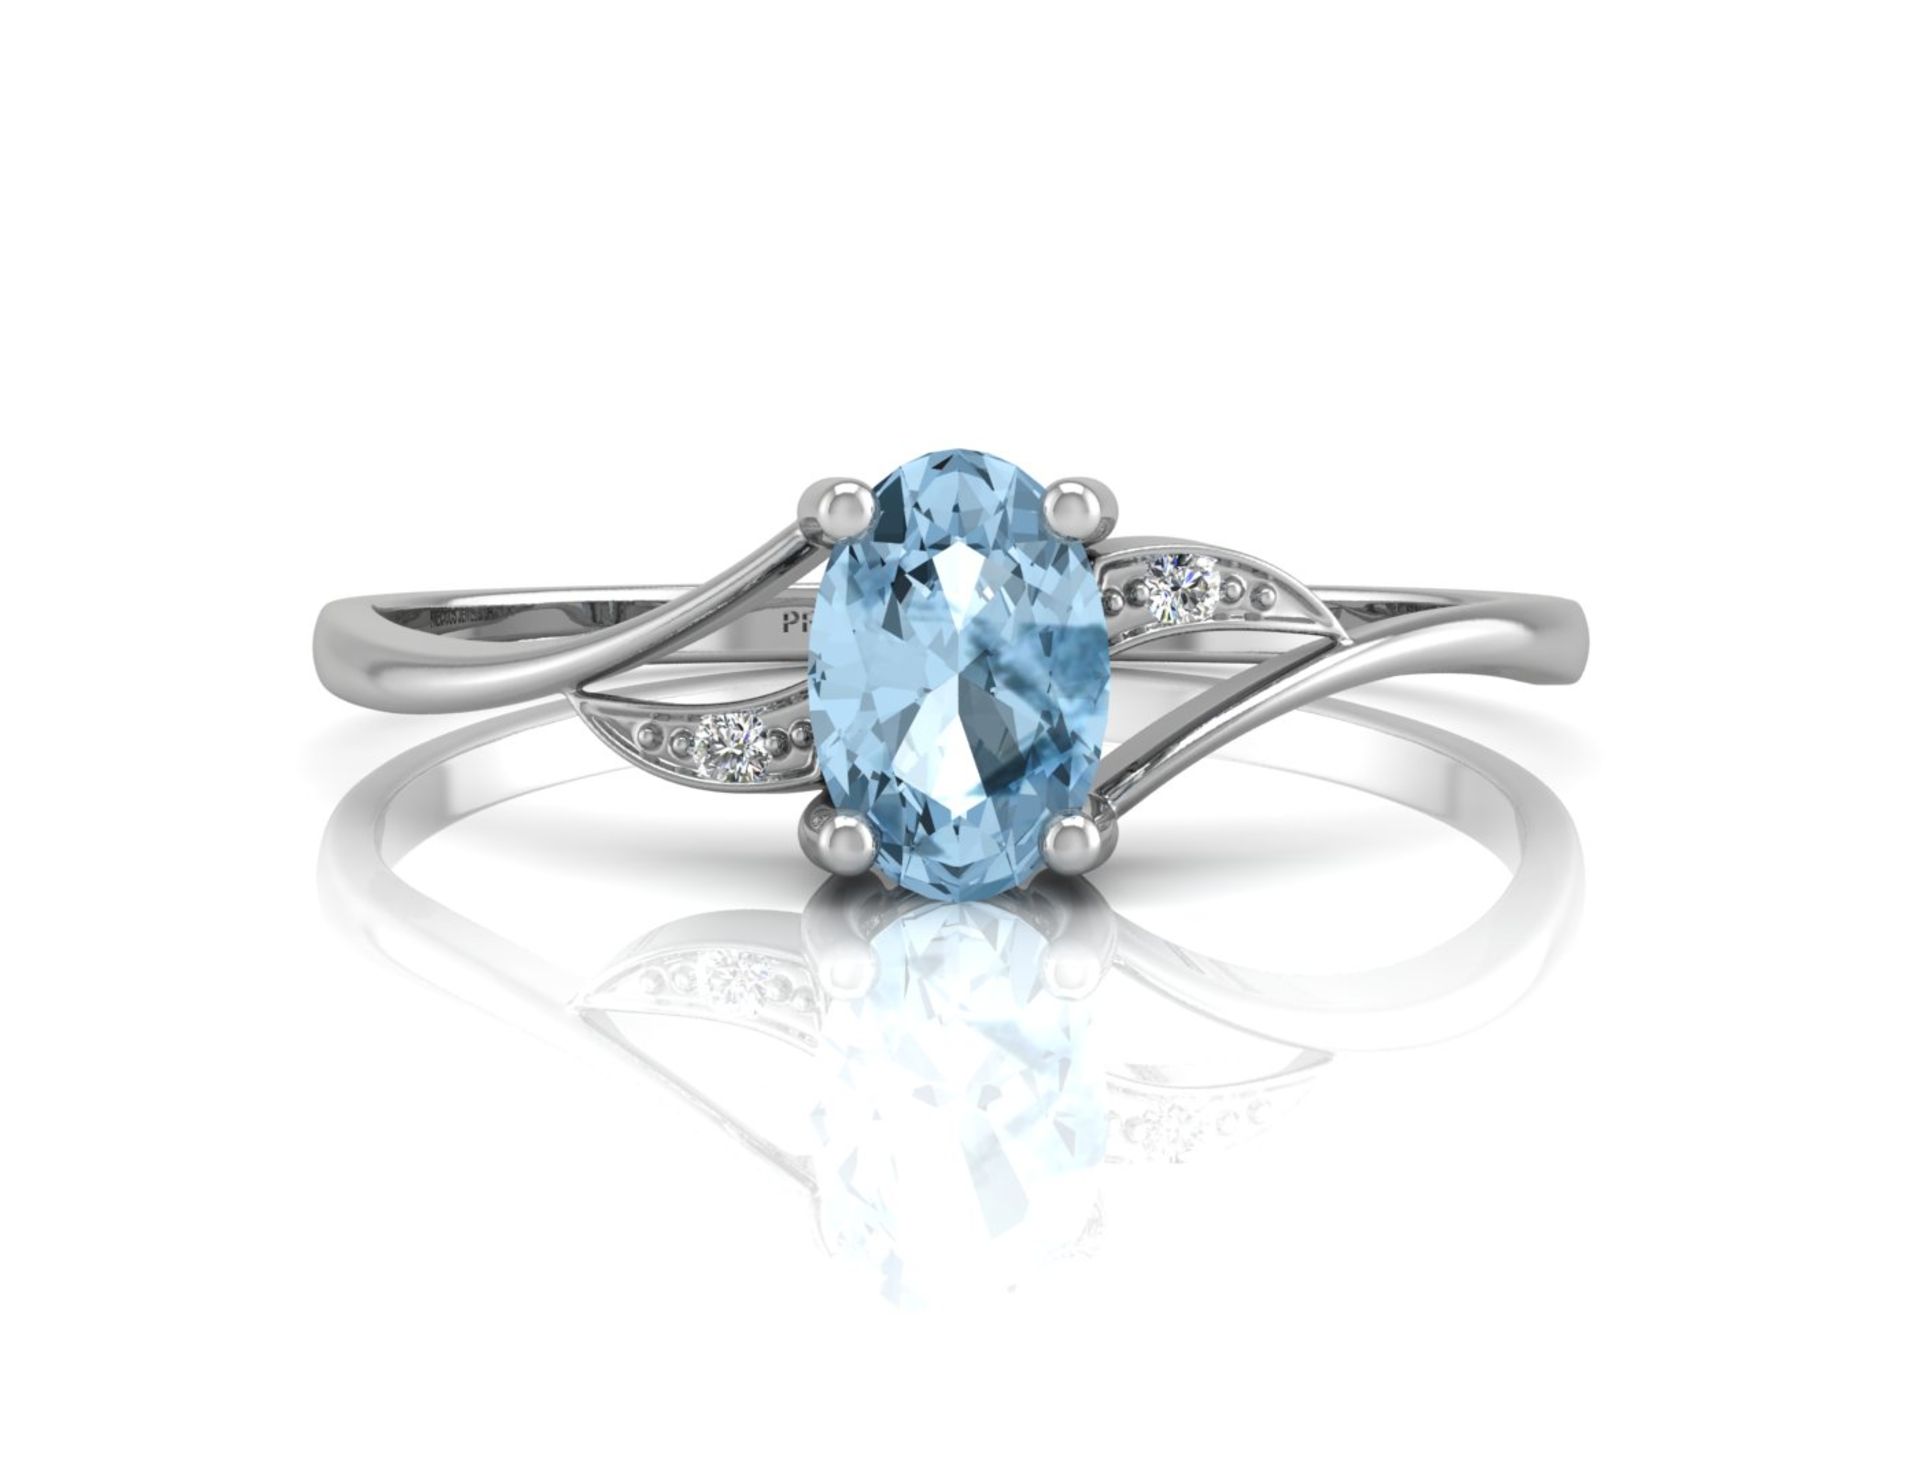 9ct White Gold Diamond And Blue Topaz Ring 0.01 Carats - Valued by AGI £625.00 - 9ct White Gold - Image 4 of 4